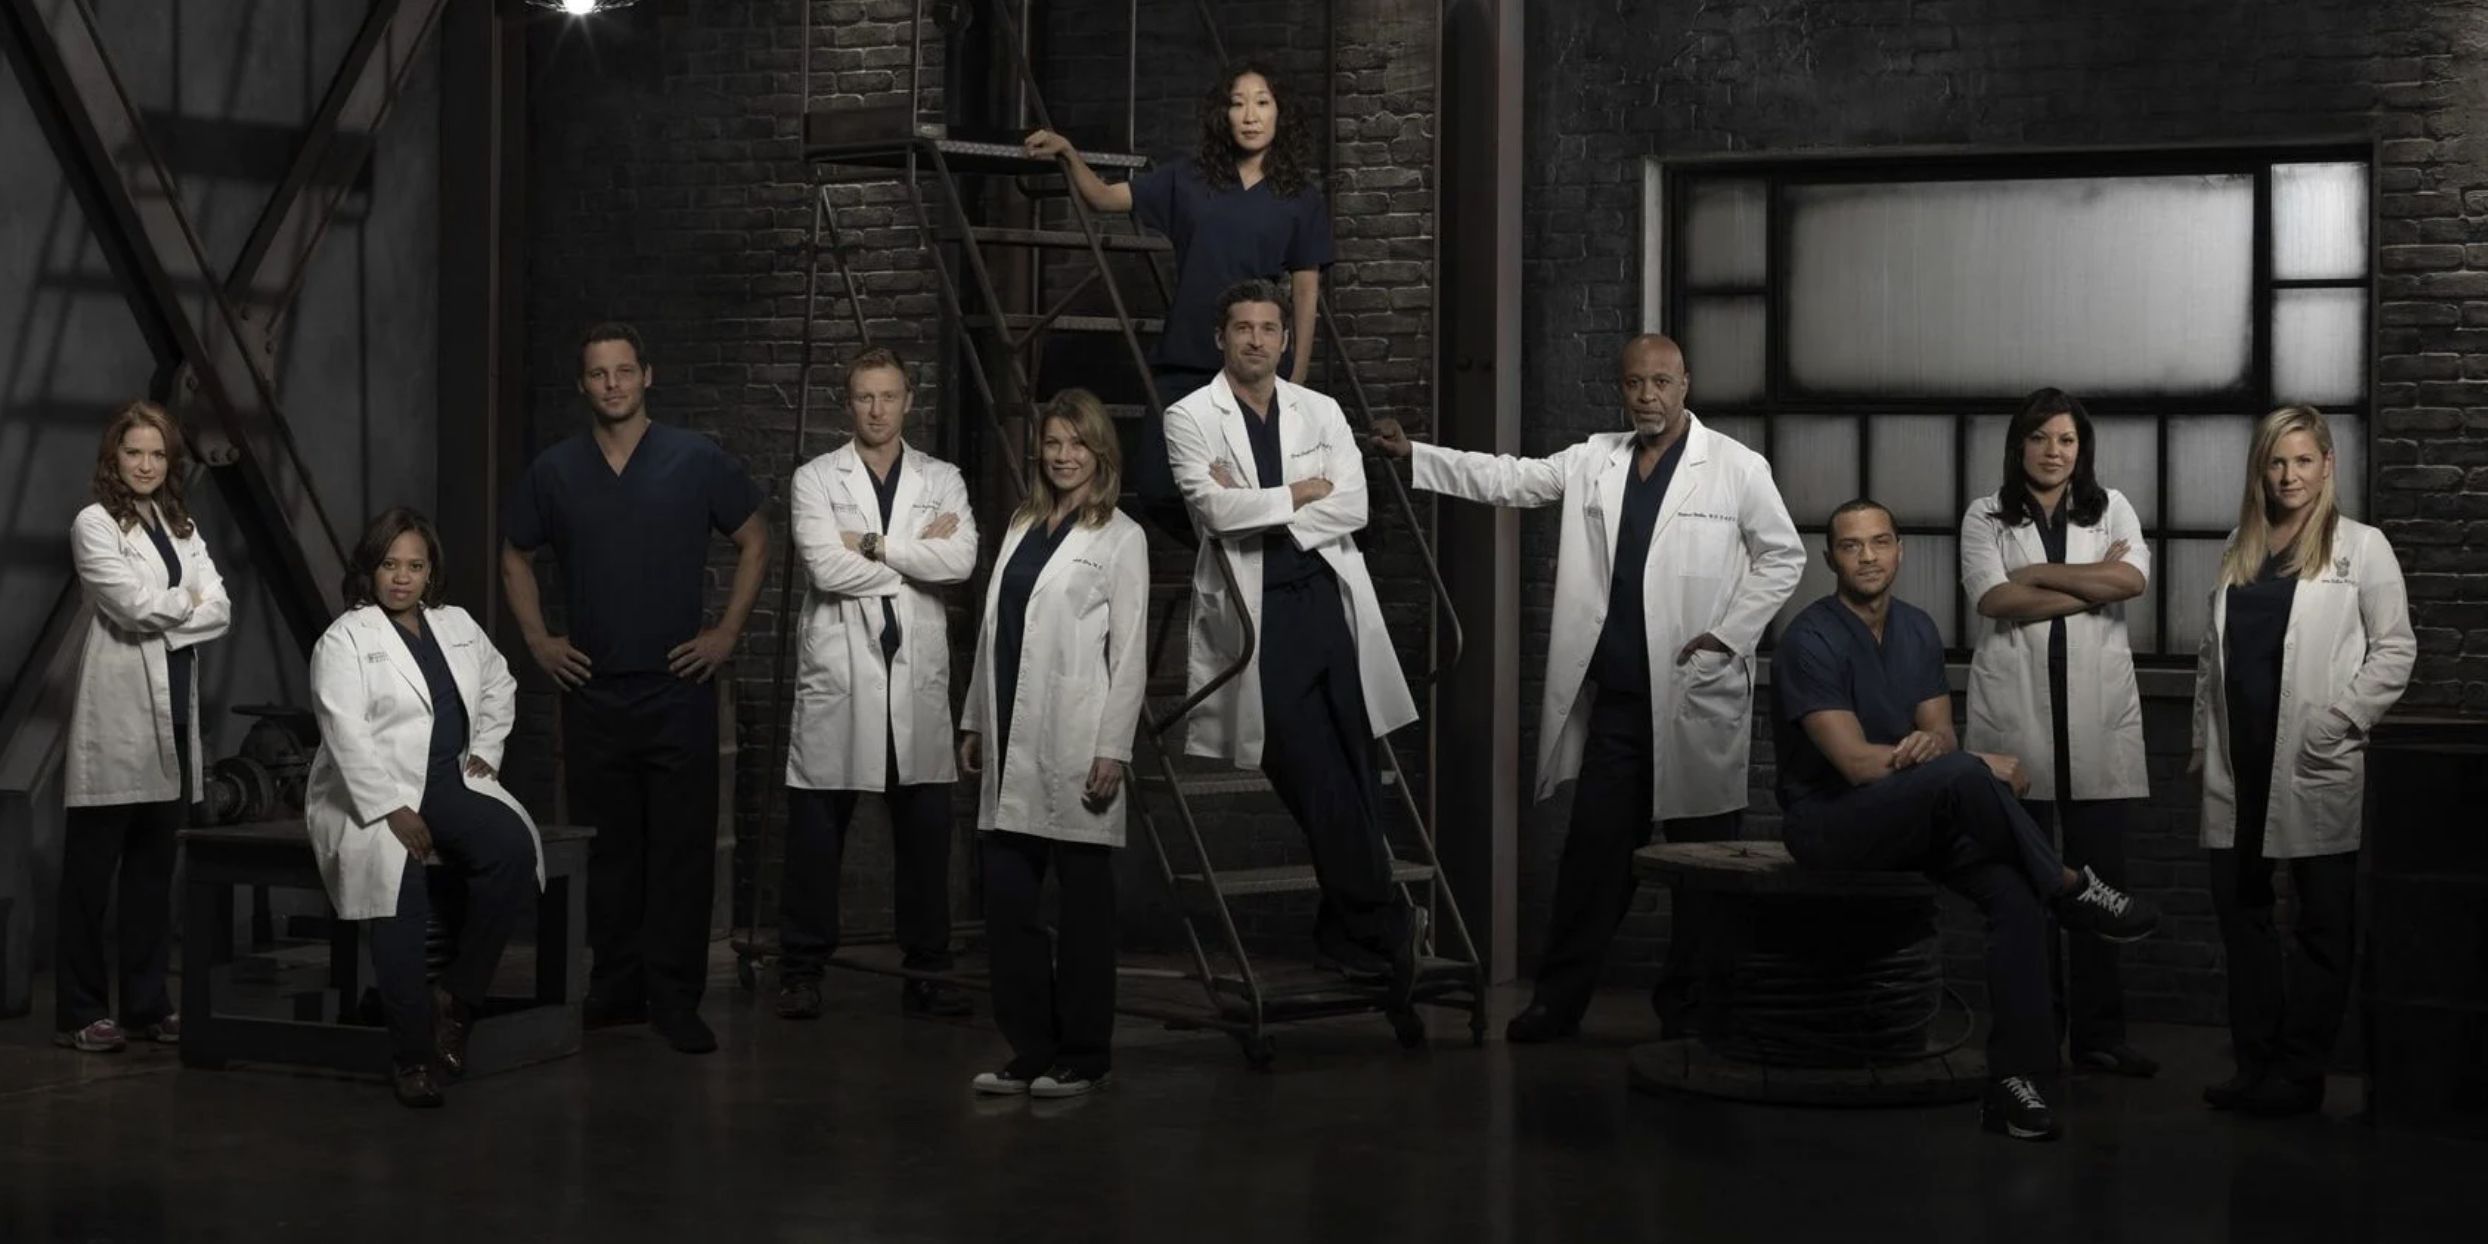 Greys Anatomy 5 Things It Got Right About A Doctors Life (& 5 Things It Got Wrong)